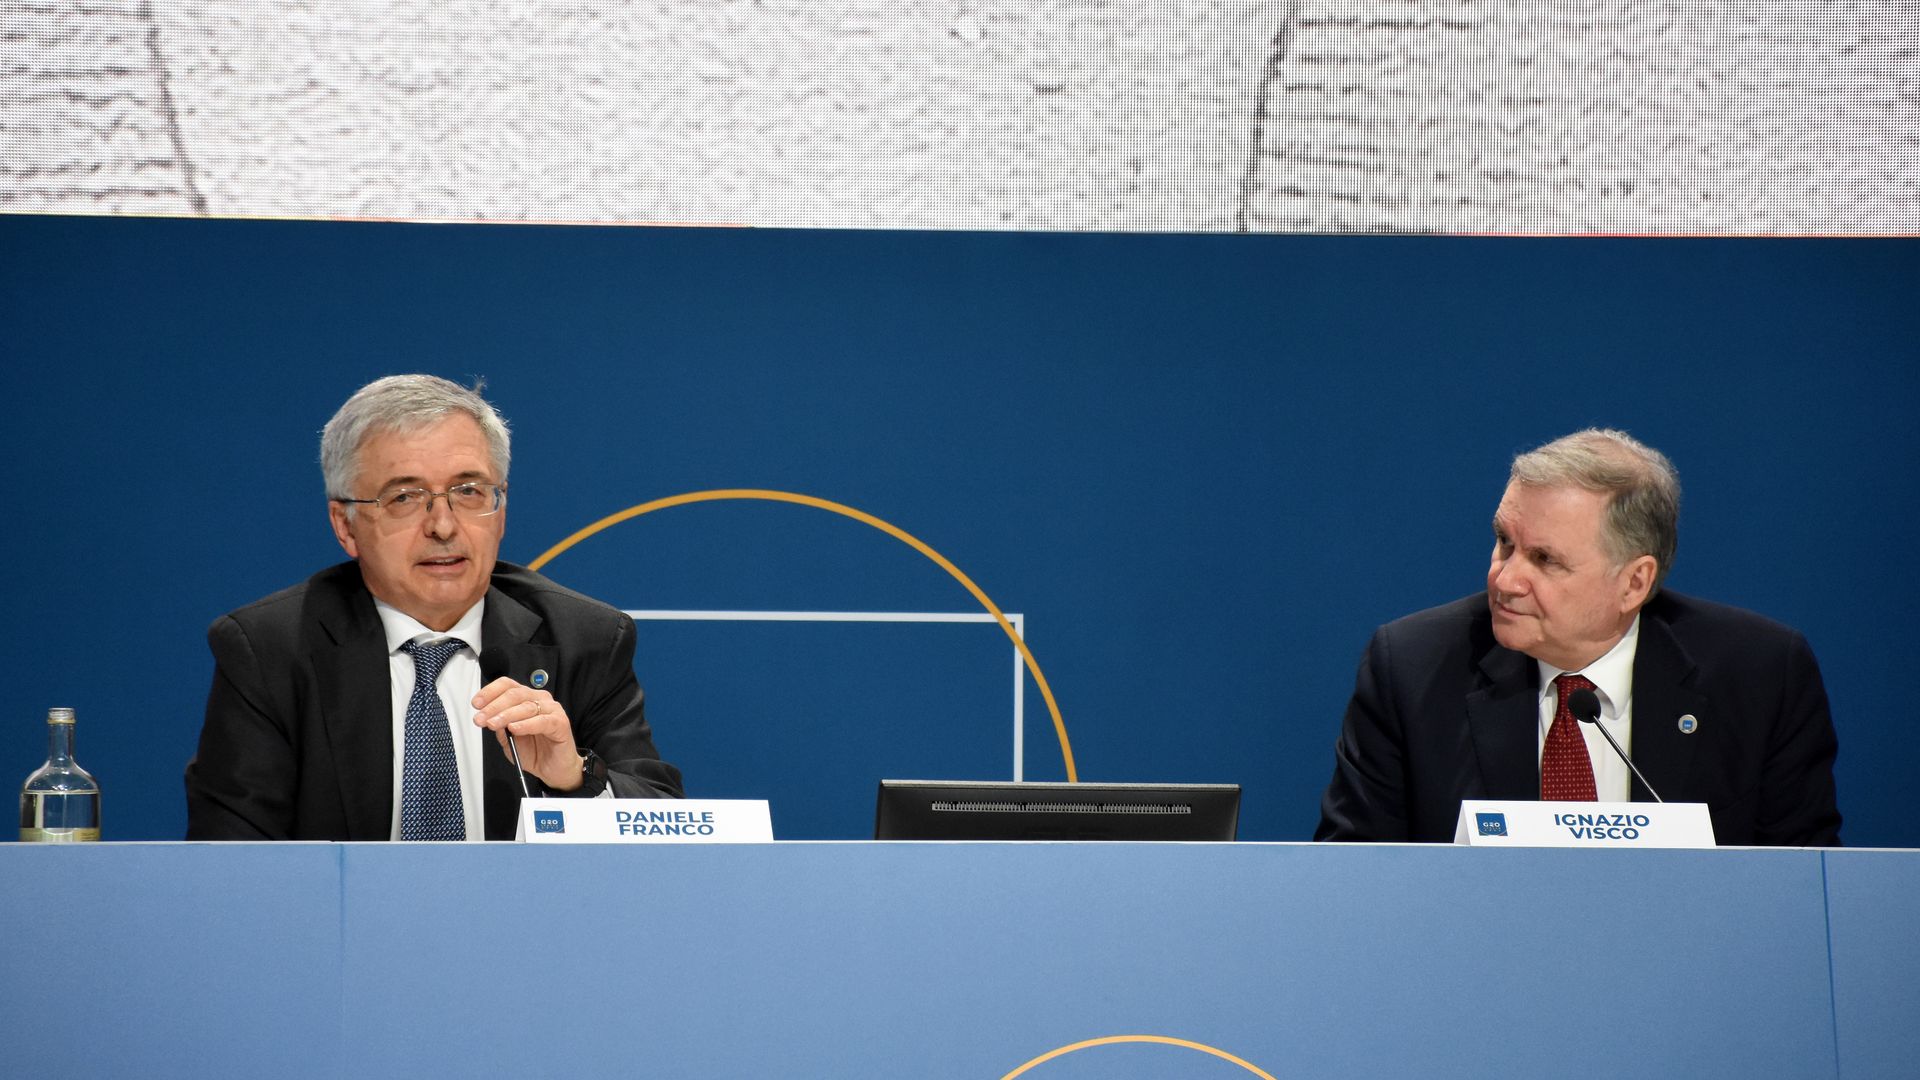 Italian Economy Minister, Daniele Franco (L) and Governor of the Bank of Italy, Ignazio Visco (R) hold a press conference.